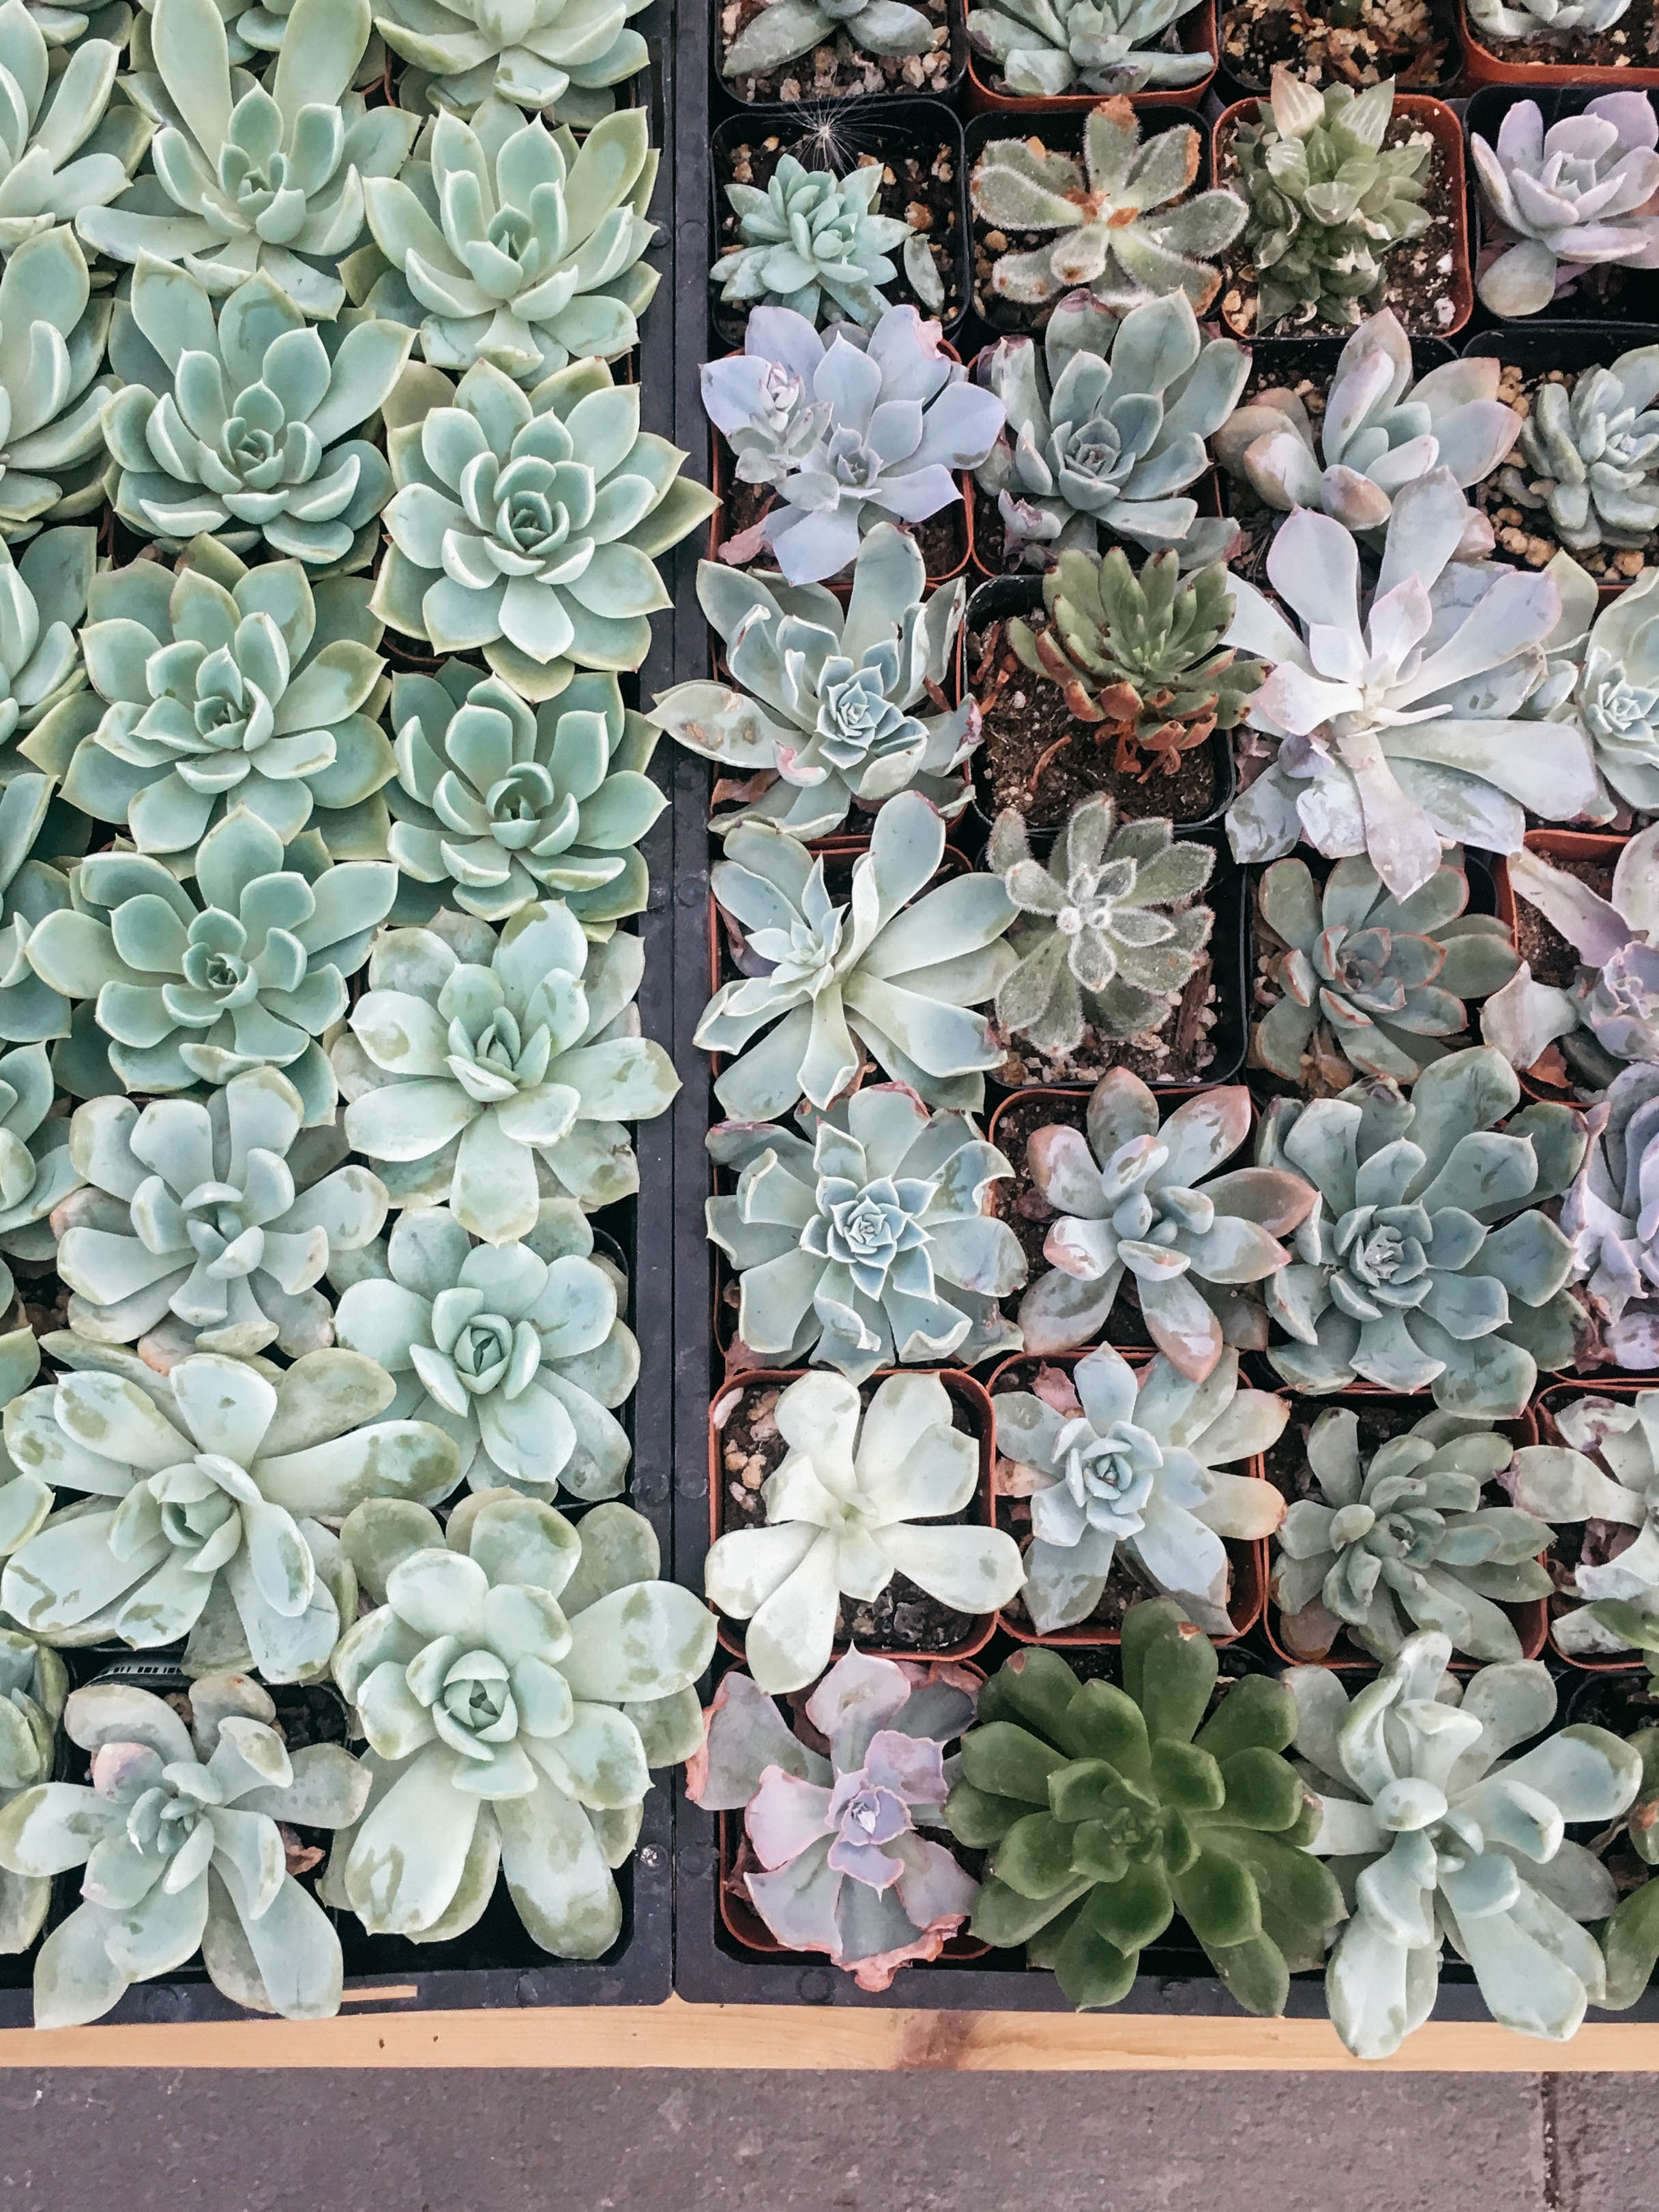 Succulents / Why You Need House Plants in Your Home / Houseplants / Indoor Plants / House Plants / Air Purifying Plants / theanastasiaco.com @theanastasiaco